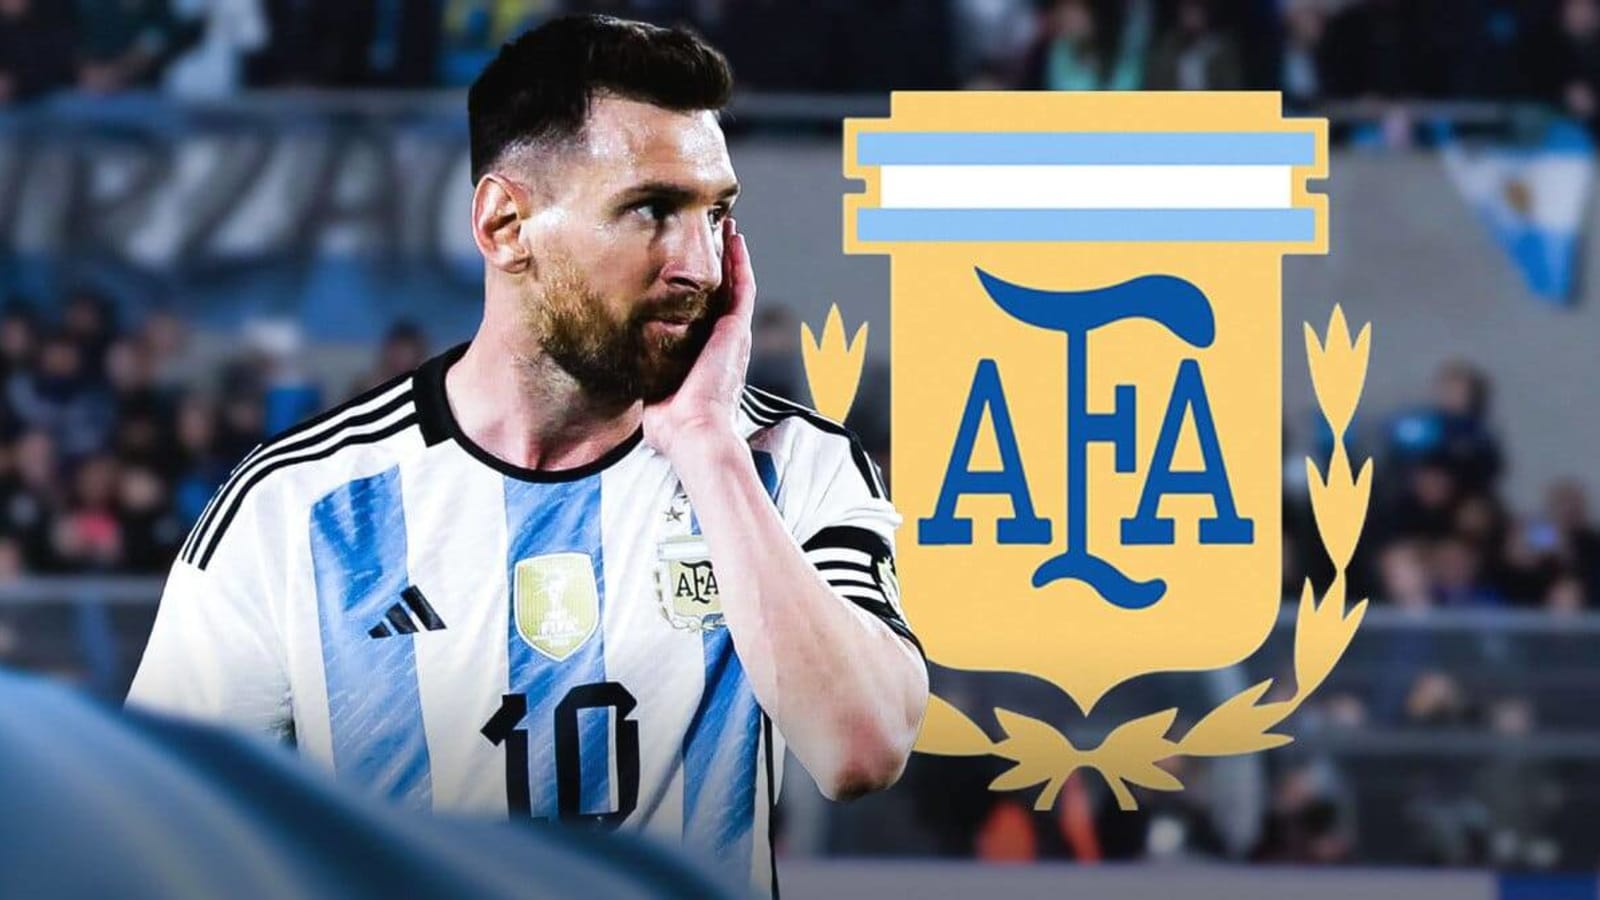 Lionel Messi ruled out of Argentina’s friendlies due to injury